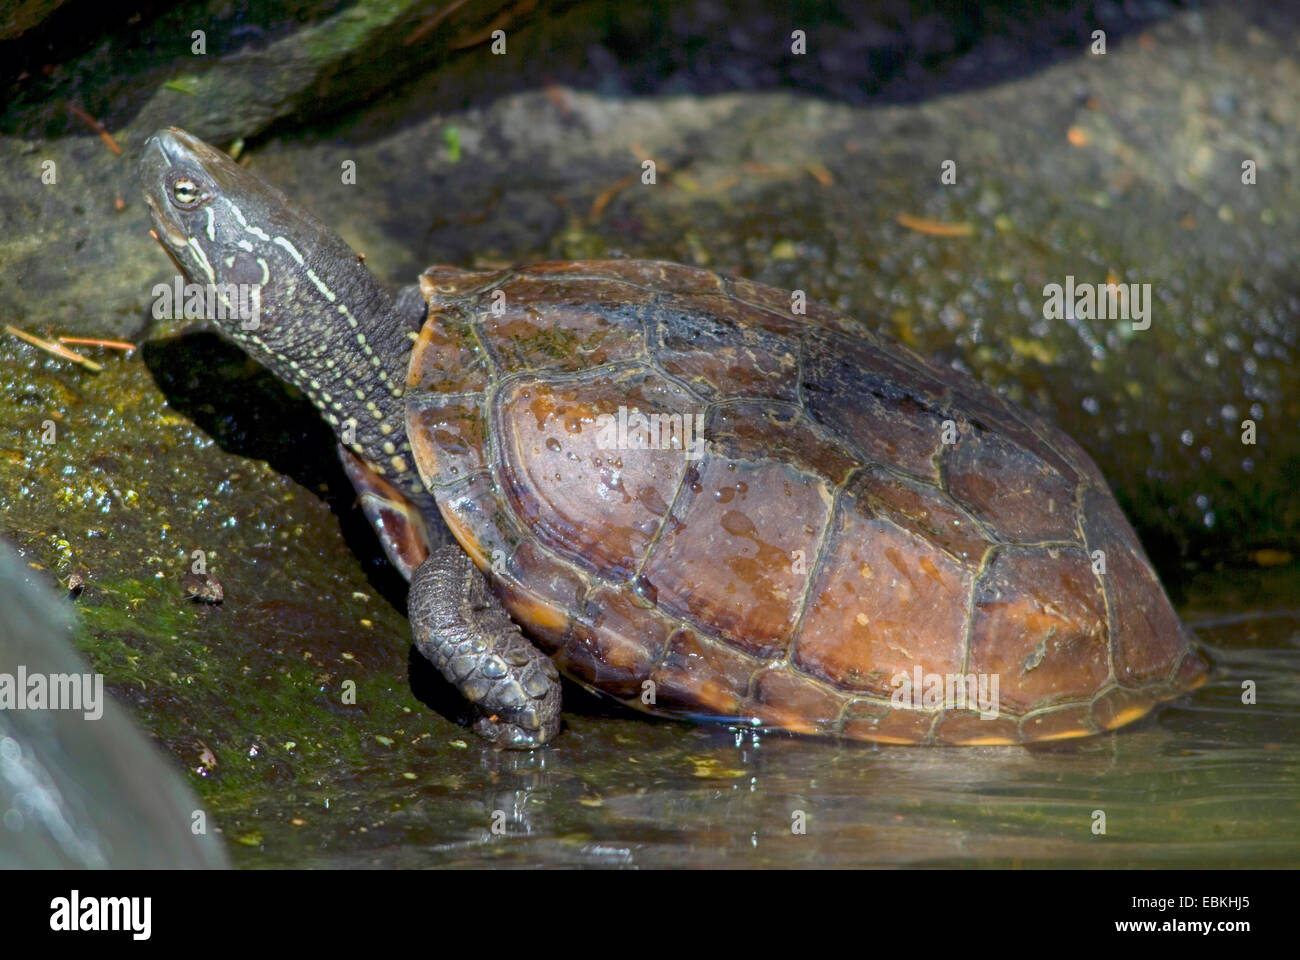 Reeves' turtle, Chinese three-keeled pond turtle (Chinemys reevesii), coming out of water Stock Photo